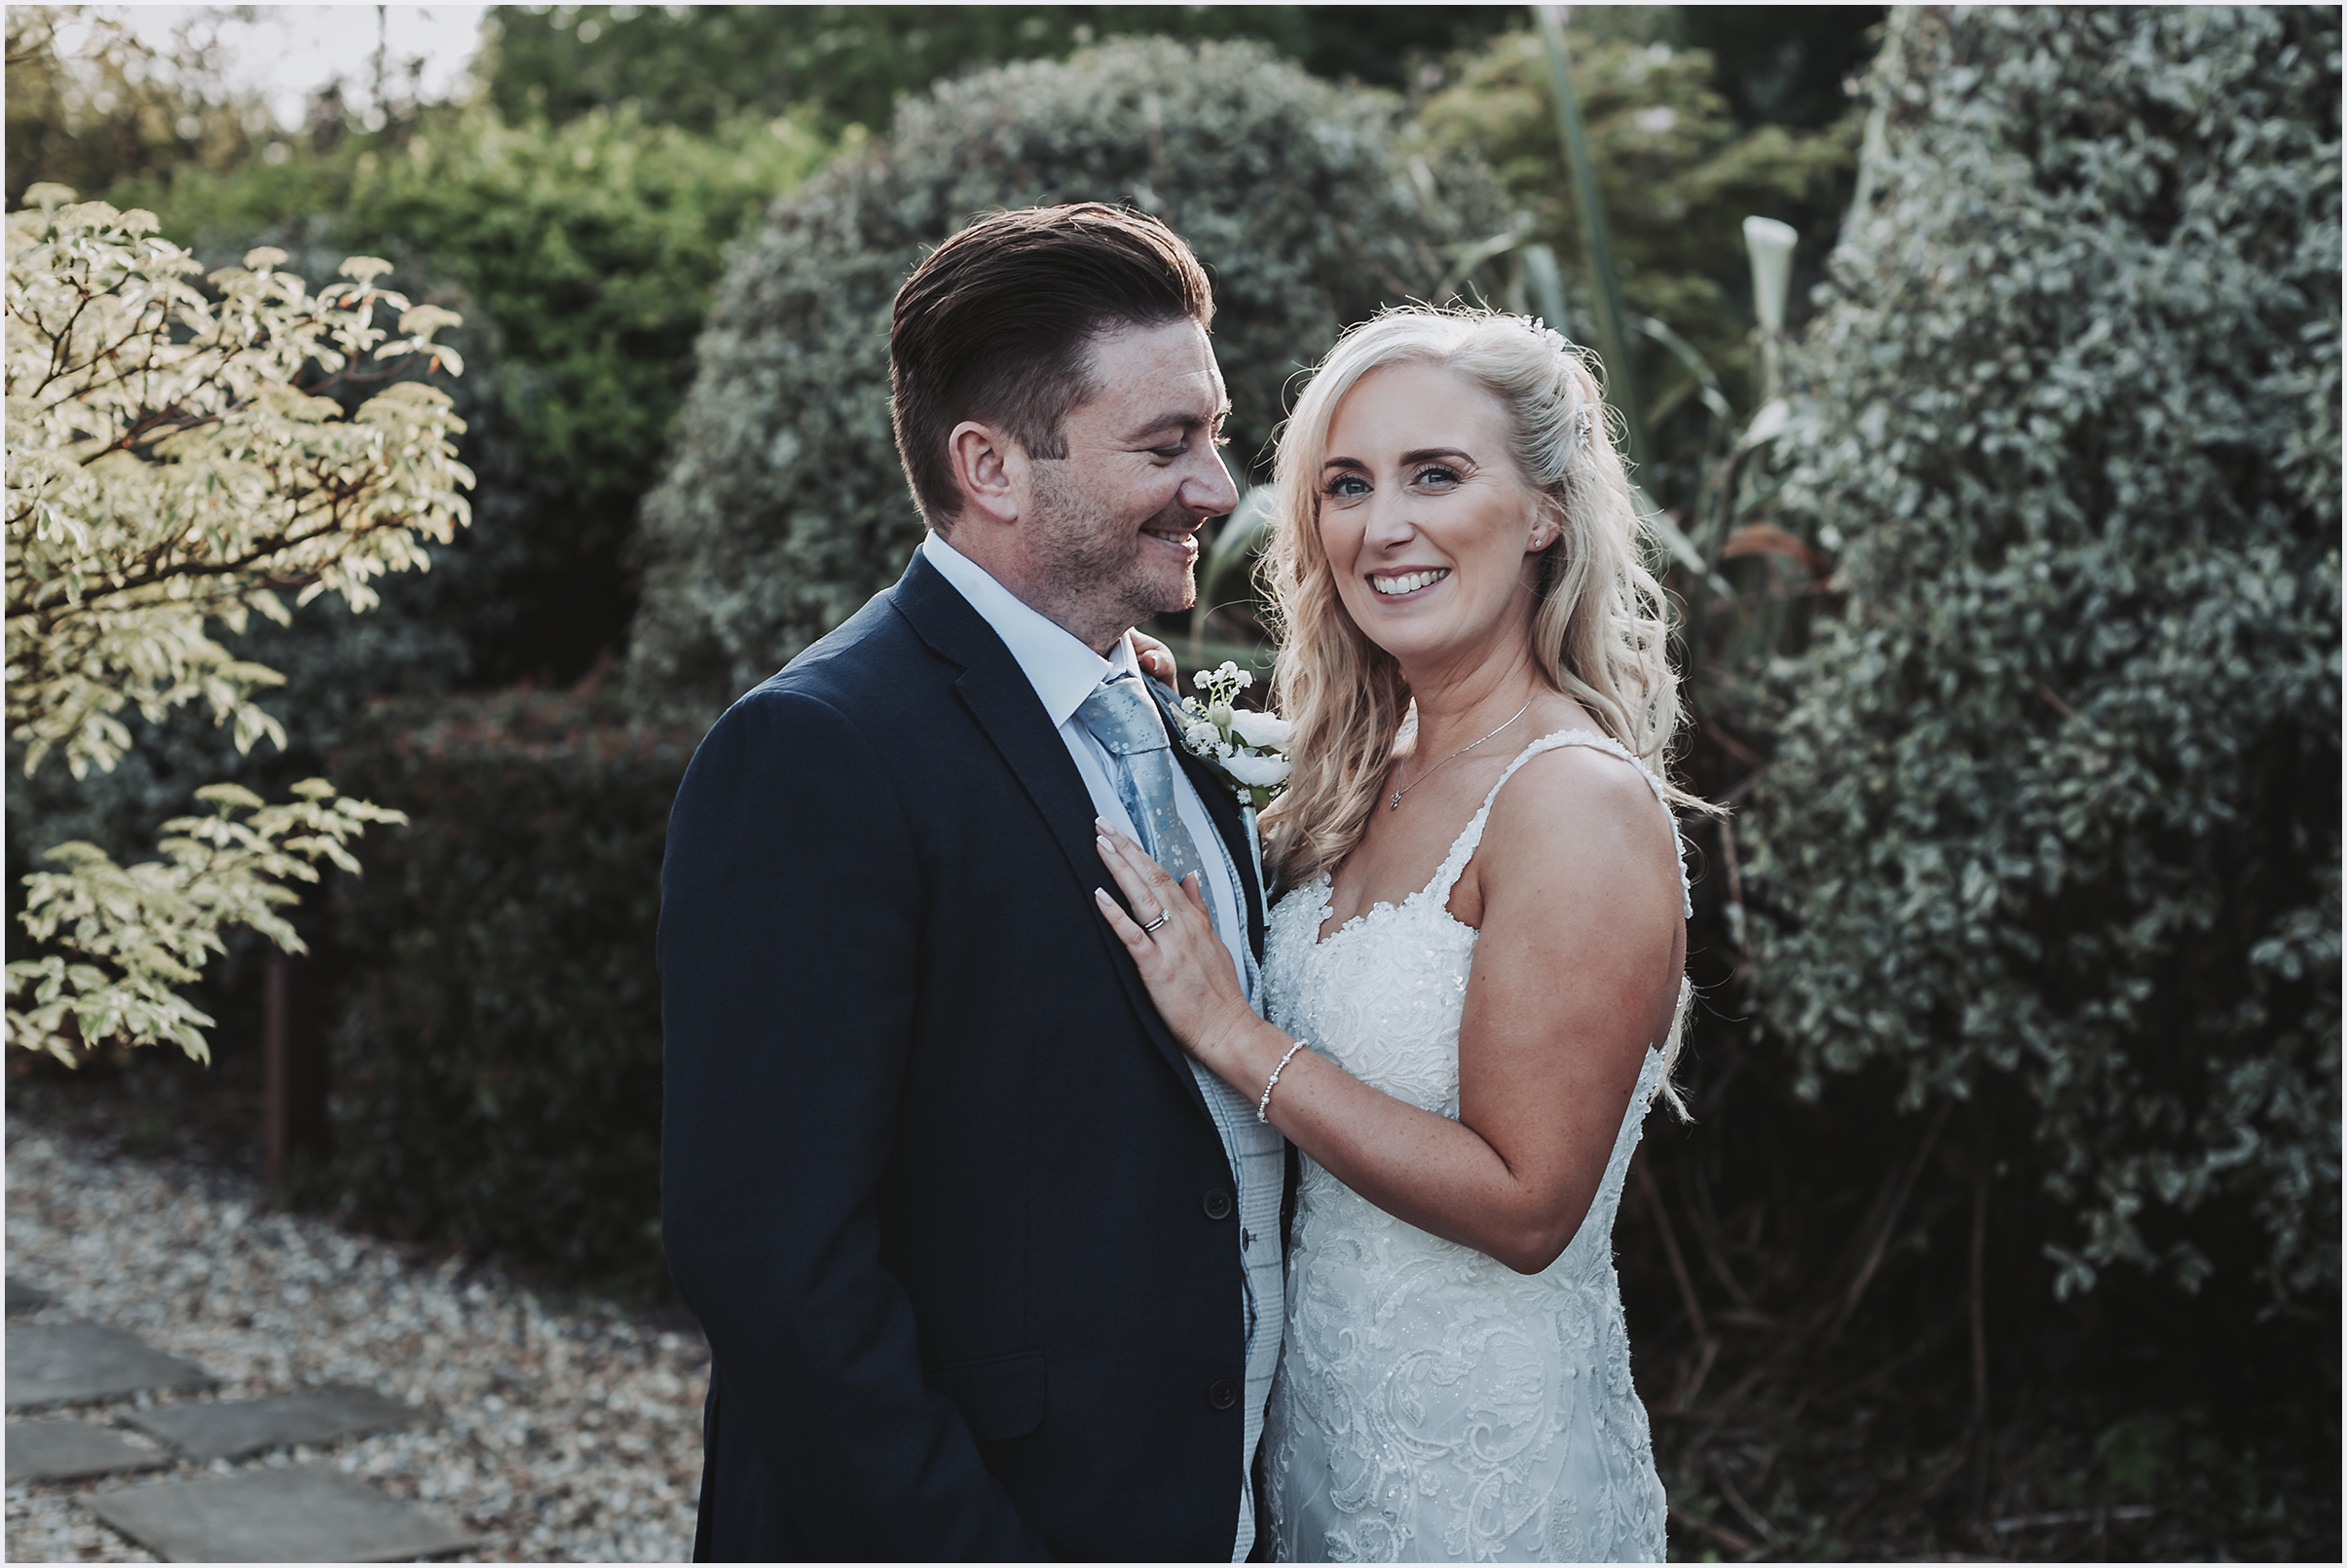 A bride resting her hand on her new husband's shoulder as she smiles at the camera in the beautiful gardens at The Grosvenor Pulford Hotel and Spa.